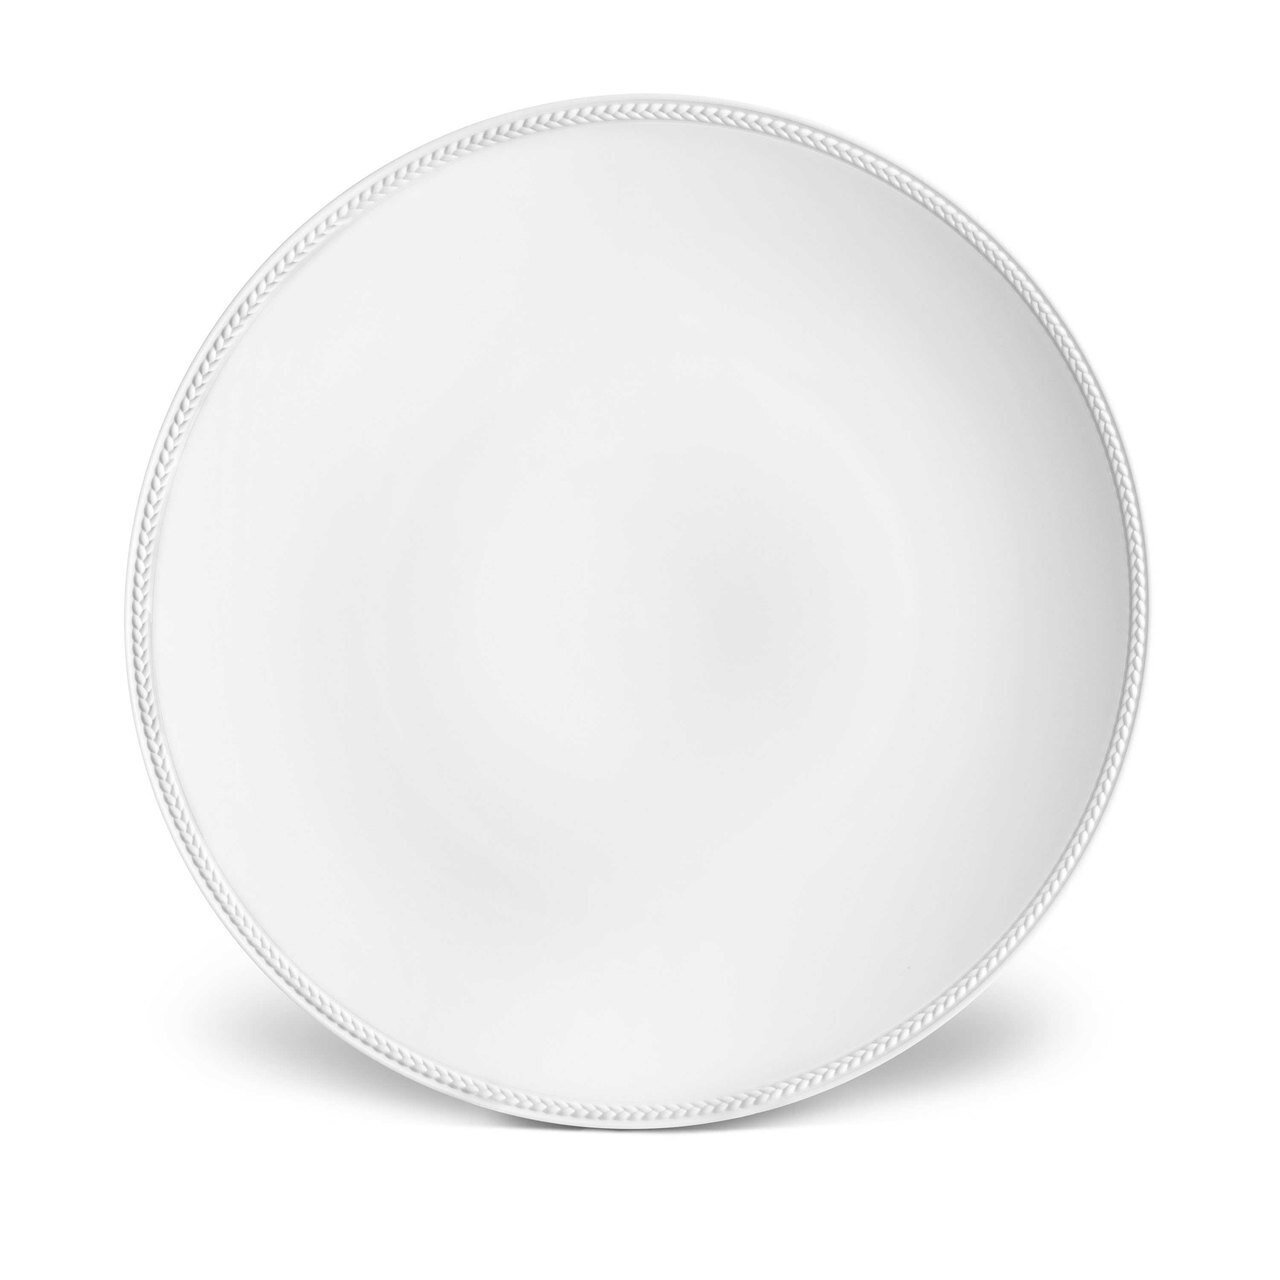 L'Objet Soie Tressee Charger White